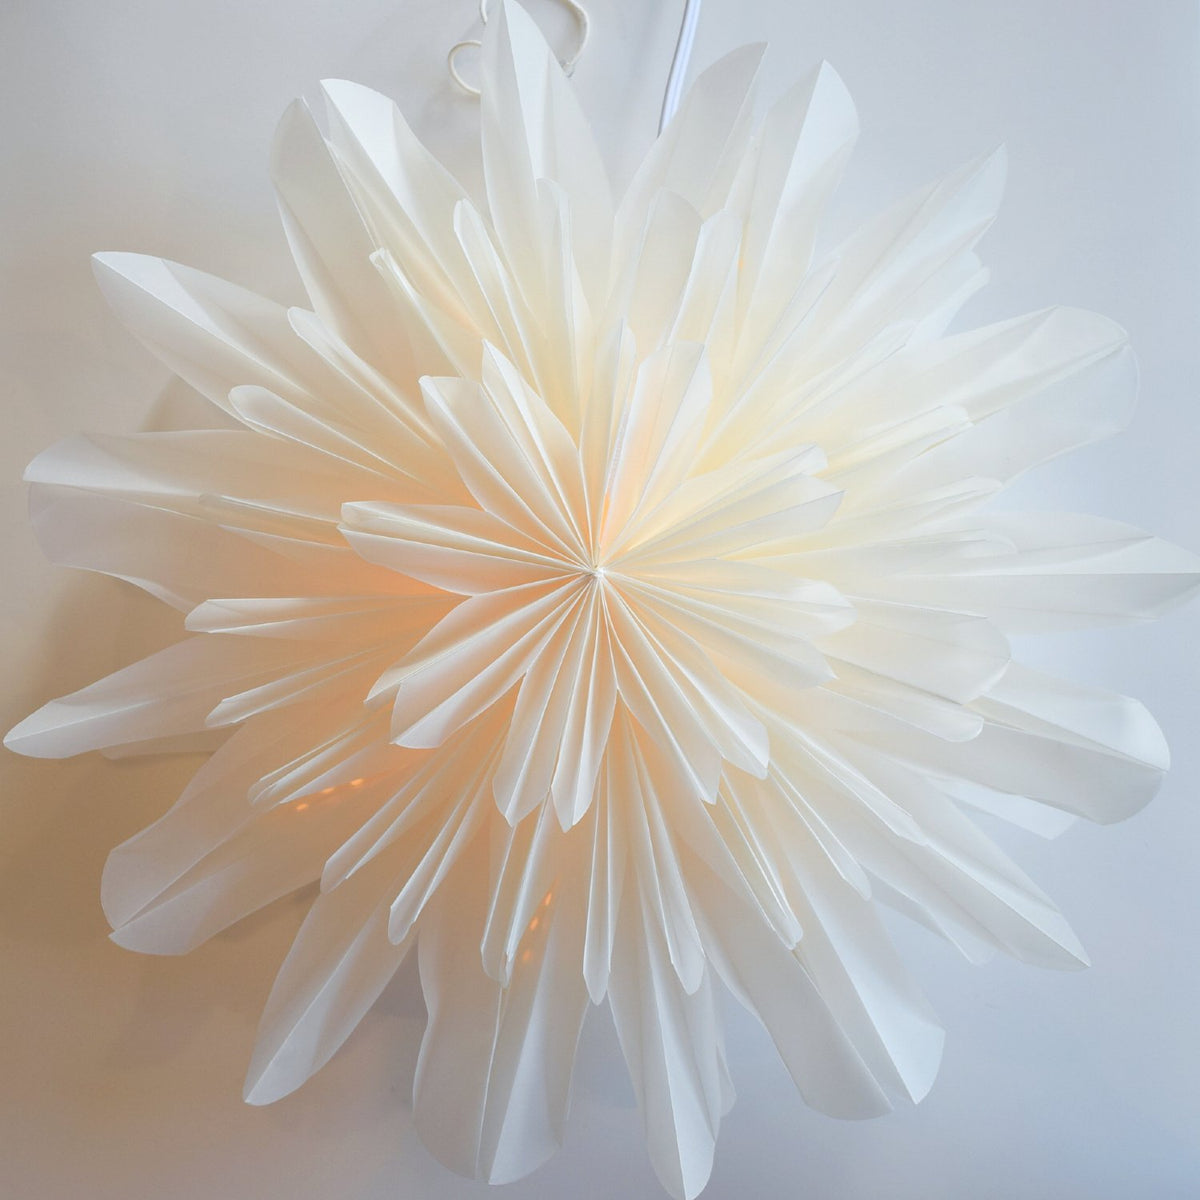 17" White Snowfall Snowflake Star Lantern Pizzelle Design - Great With or Without Lights - Ideal for Holiday and Snowflake Decorations, Weddings, Parties, and Home Decor